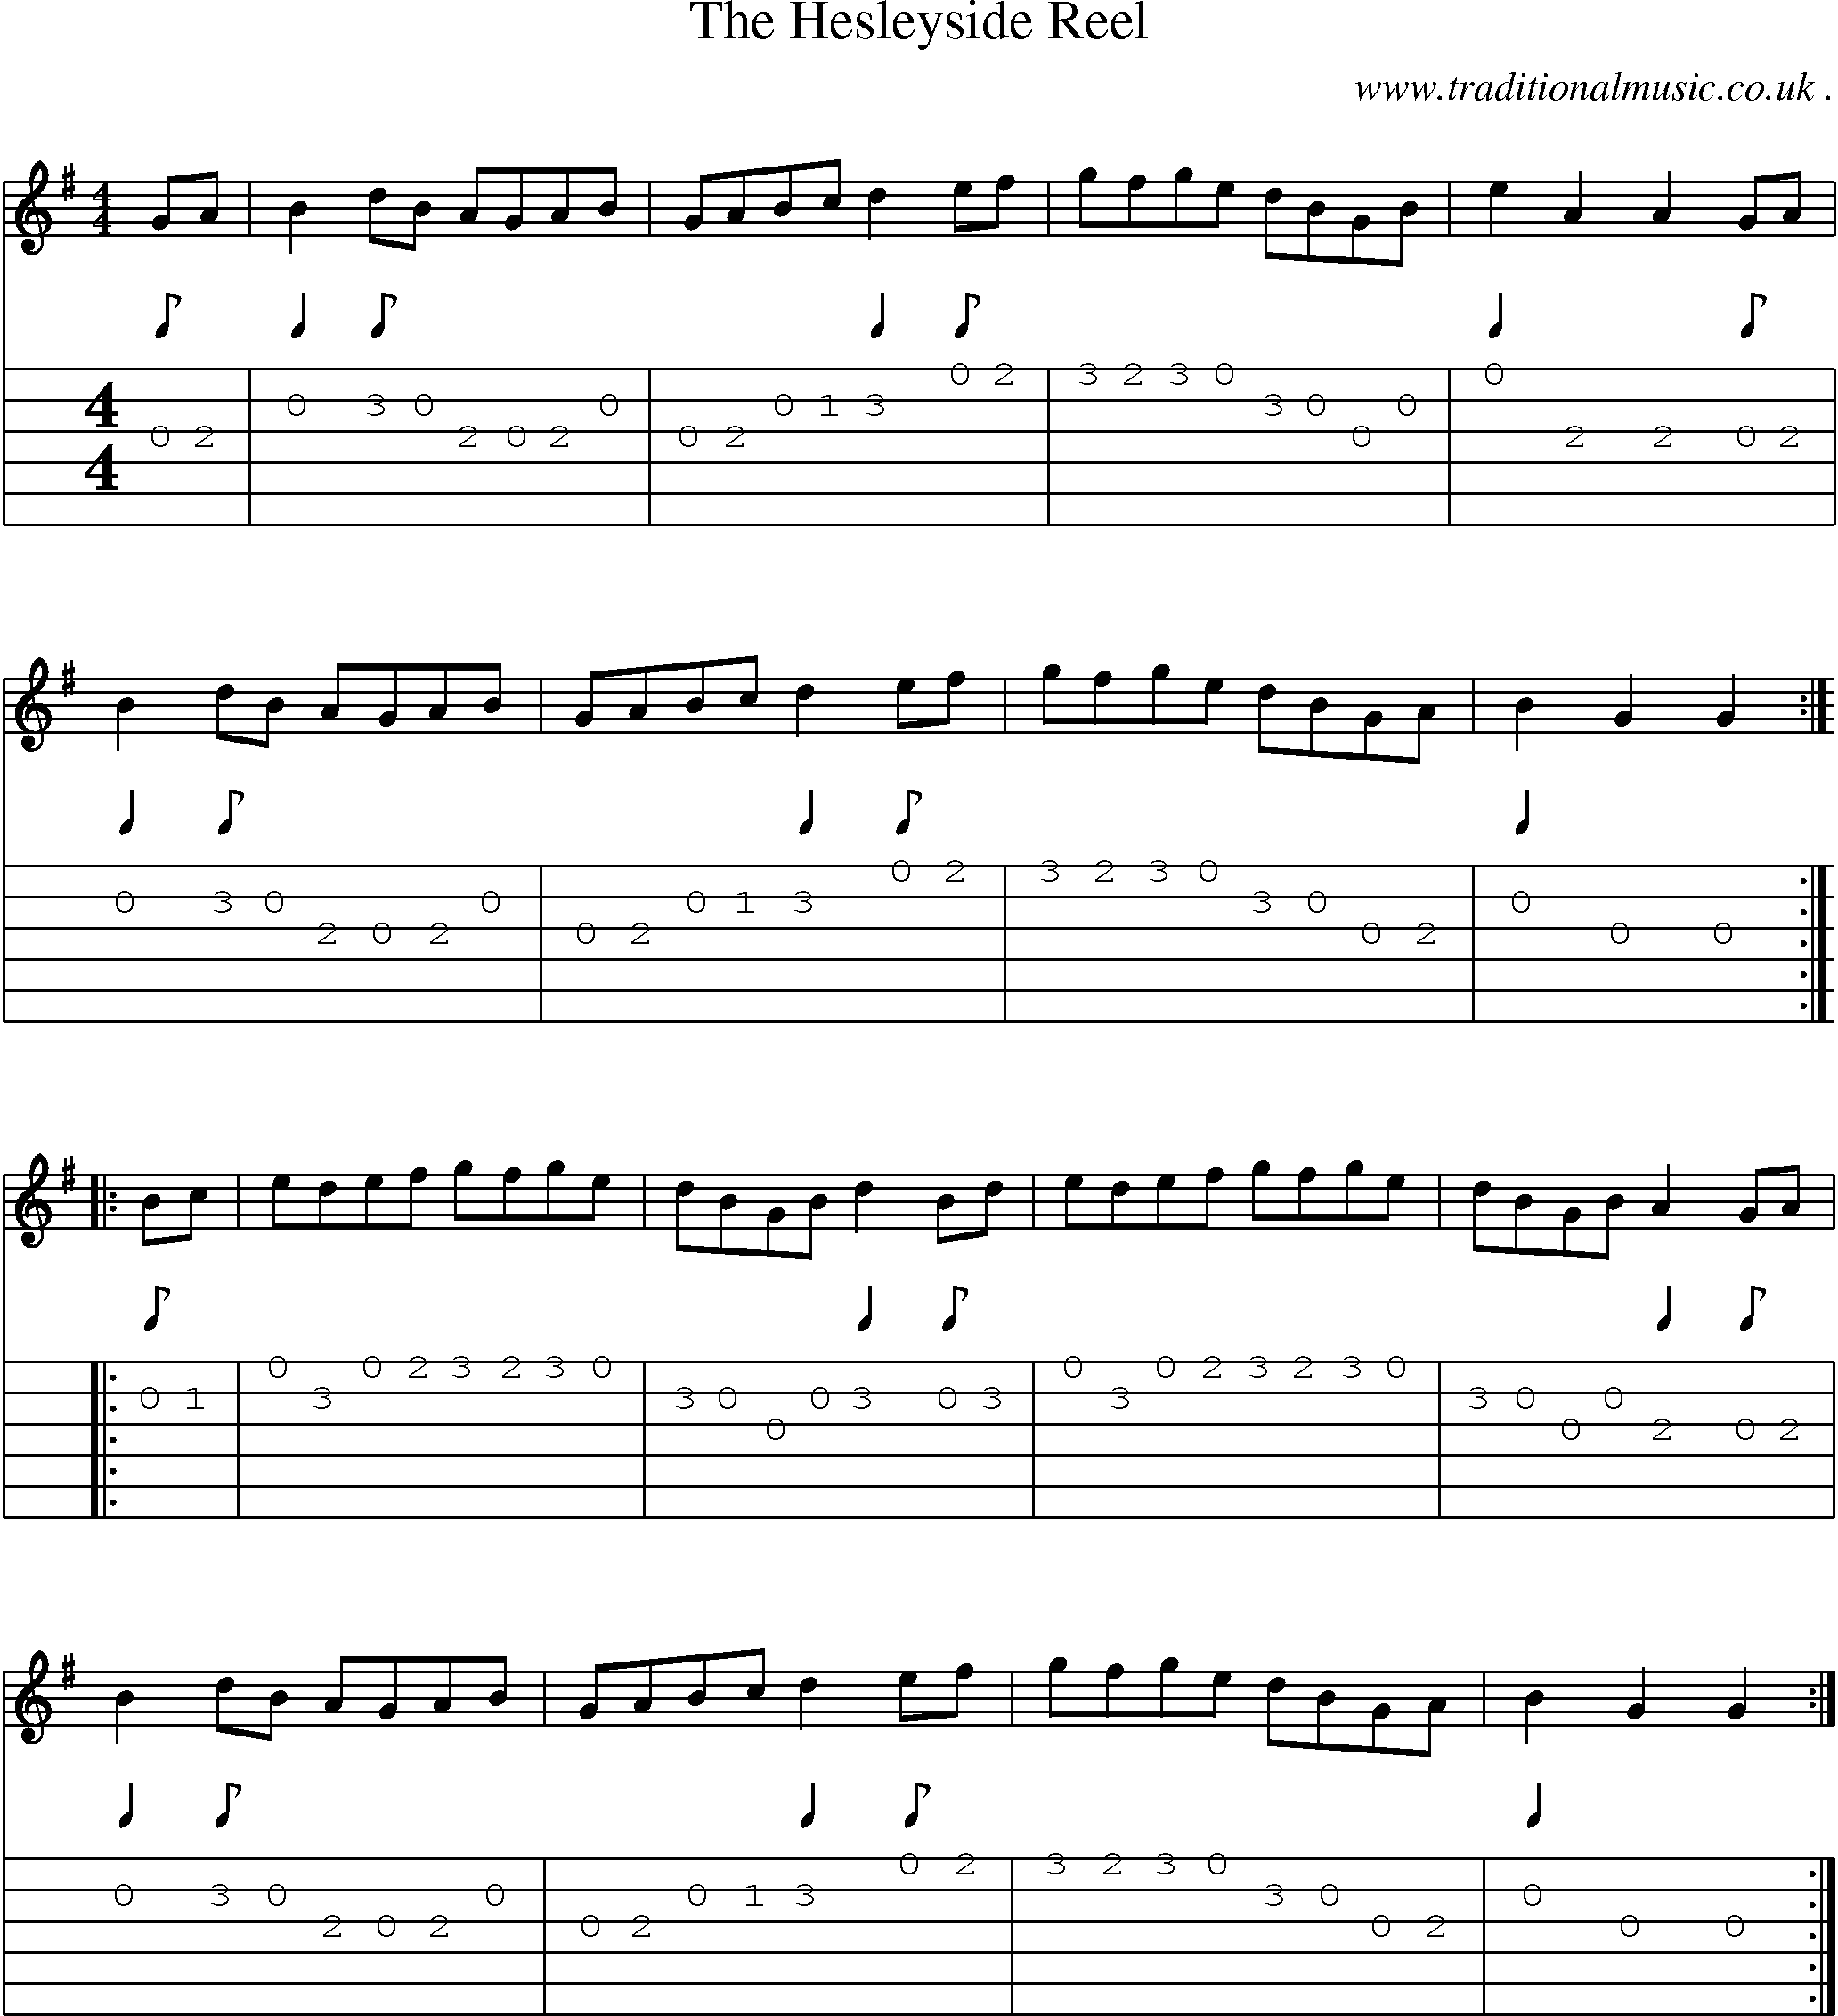 Sheet-Music and Guitar Tabs for The Hesleyside Reel